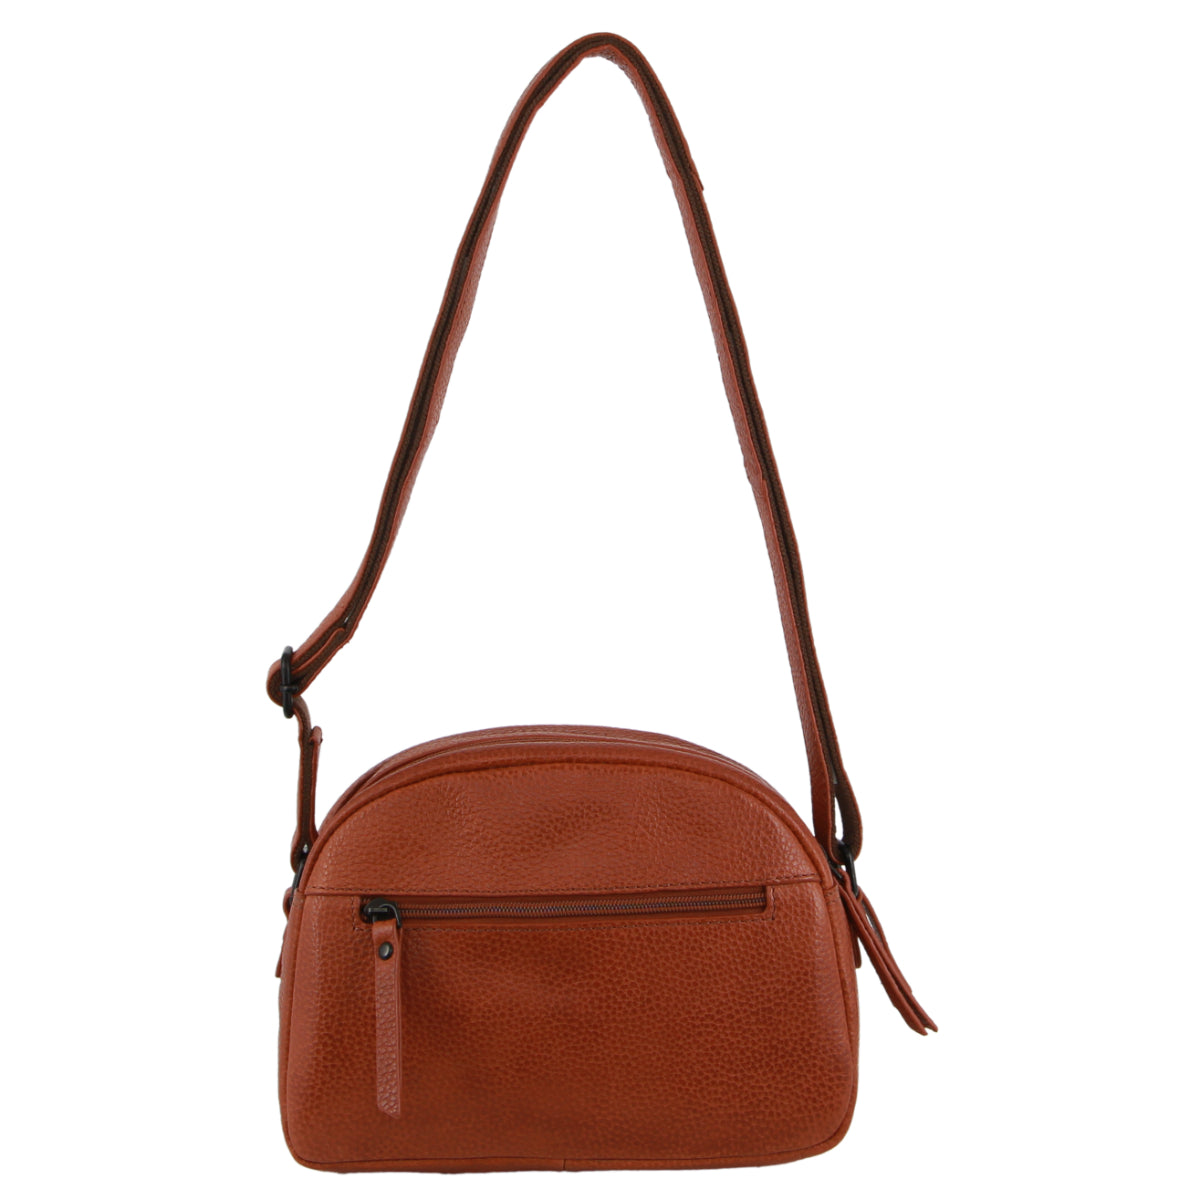 Milleni - NL3869 Small rounded leather sidebag - Cognac-1